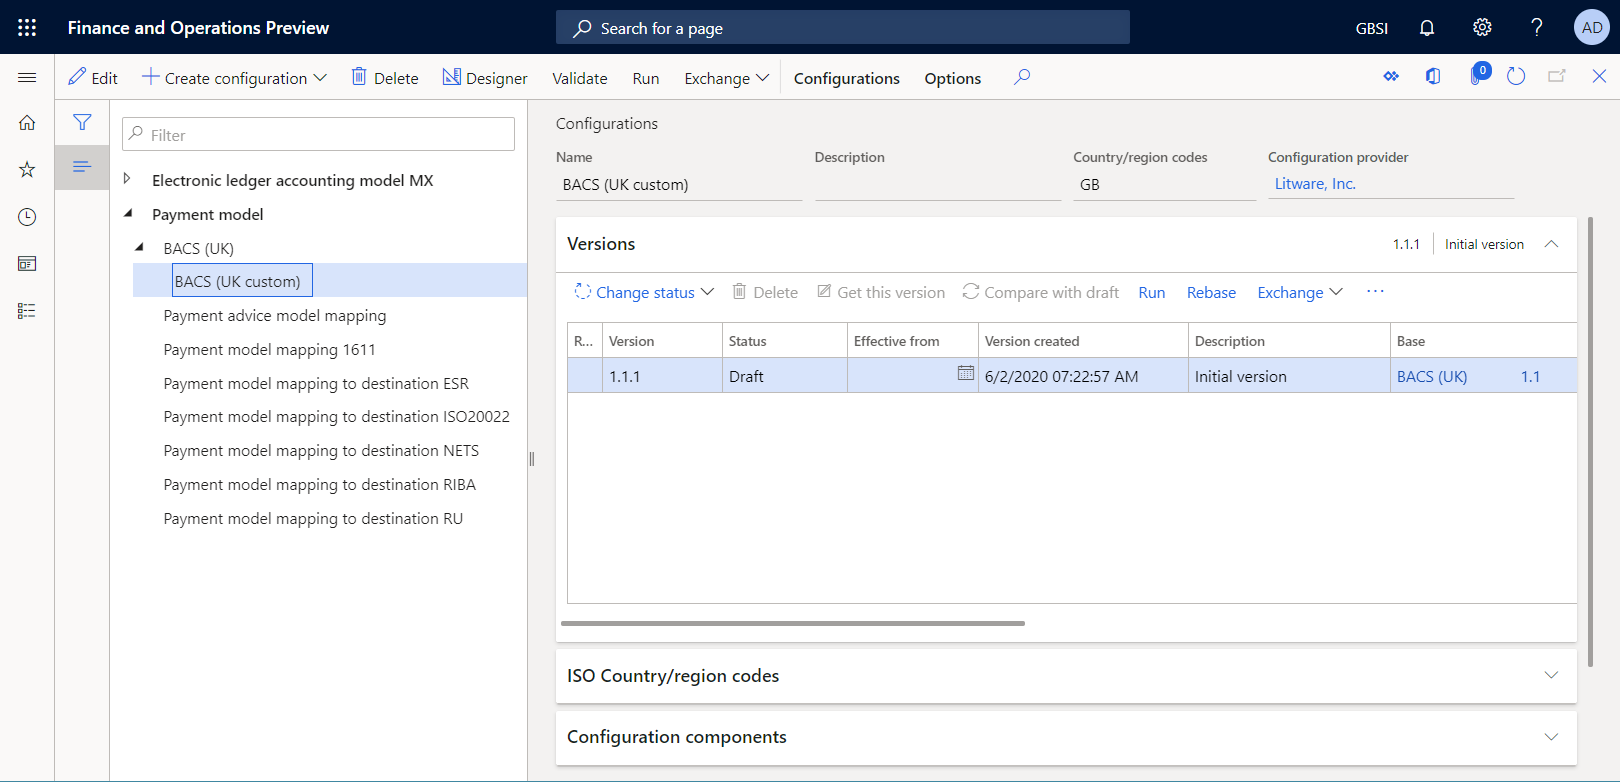 Configurations page with Version 1.1.1 of the BACS (UK custom) ER format configuration.